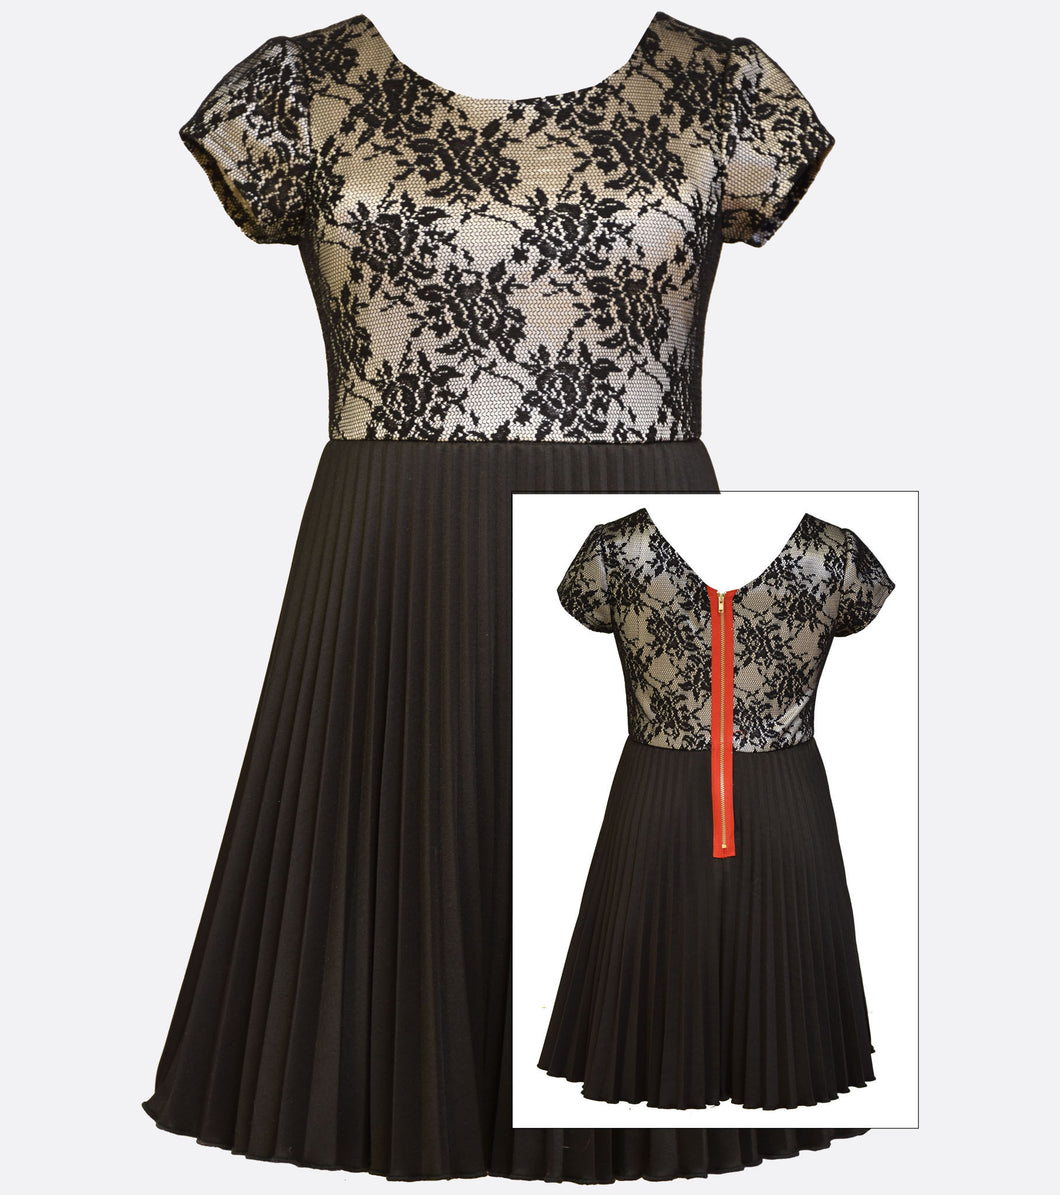 Bonnie Jean black and gold dress with a floral lace bodice and pleated skirt.